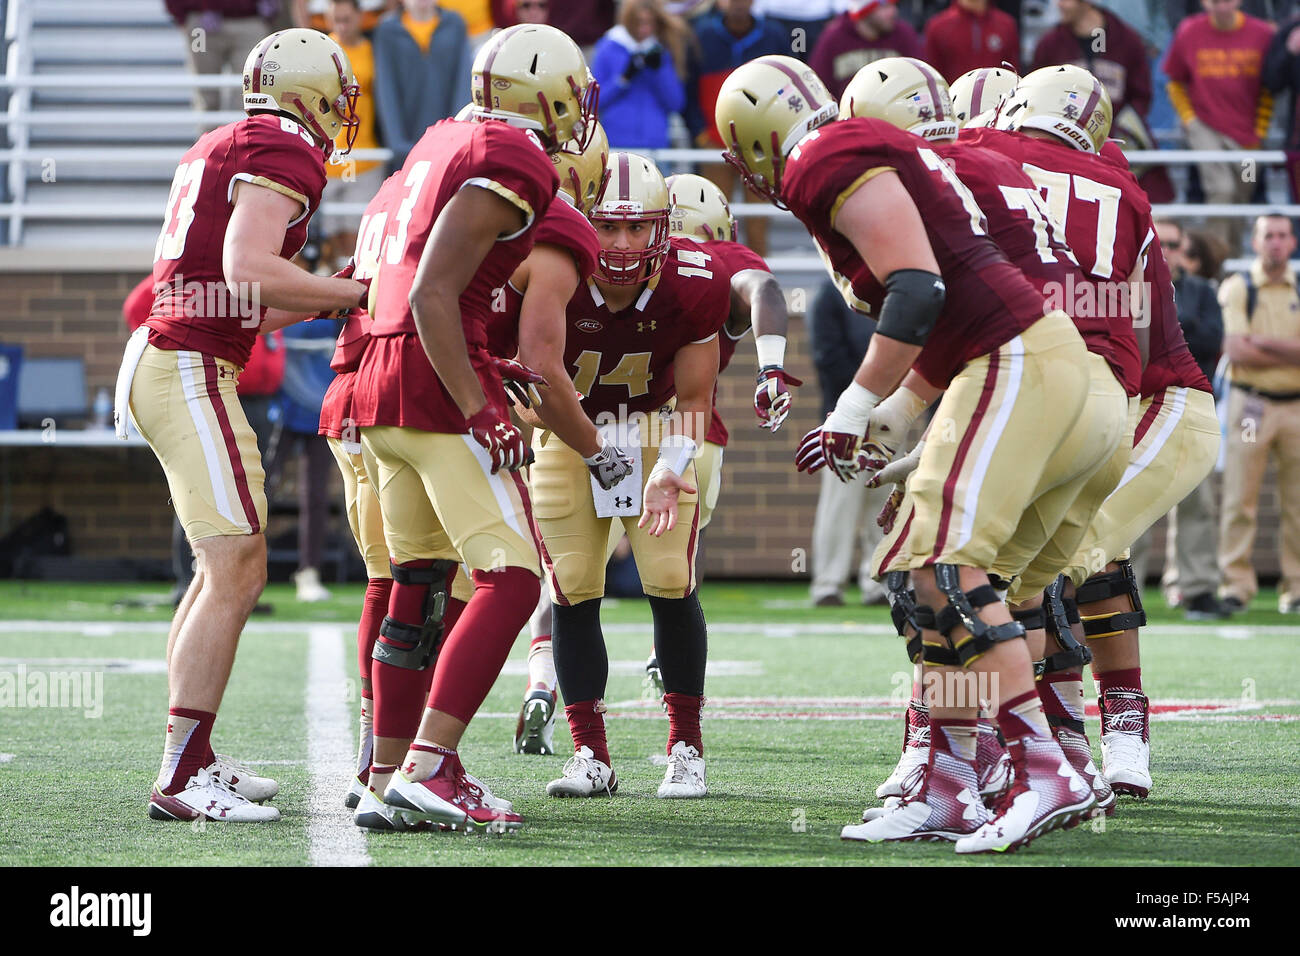 Saturday, October 31, 2015: Boston College Eagles quarterback John Fadule (14) breaks the huddle during the NCAA division 1 football game between the Virginia Tech Hokies and the the Boston College Eagles held at Alumni Stadium in Chestnut Hill, Massachusetts. Virginia Tech defeats Boston College 26-10. Eric Canha/CSM Stock Photo